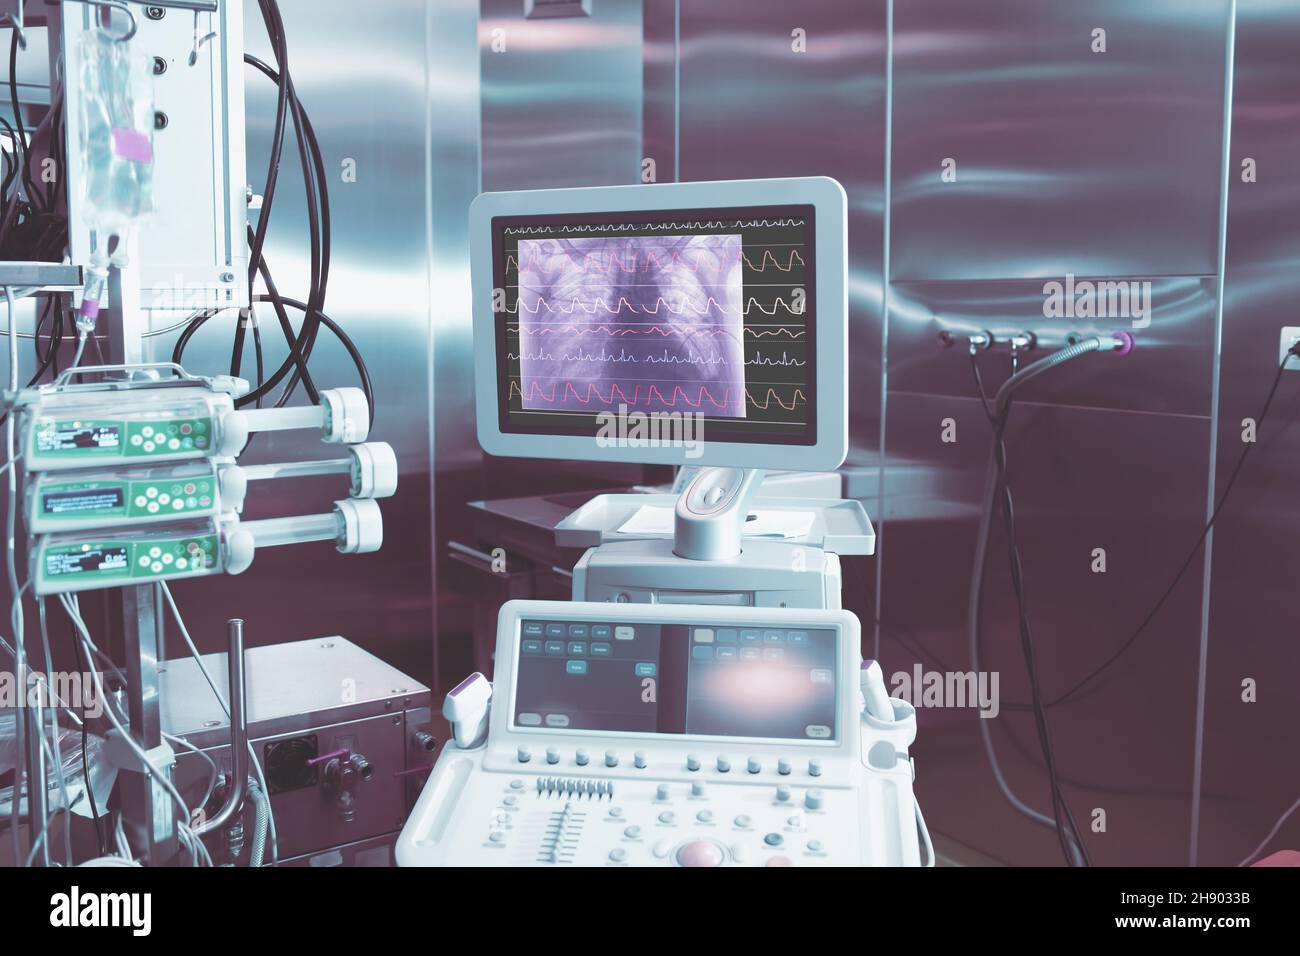 ECG and chest x-ray image on the display of medical computer in the room with steel shiny walls. Stock Photo